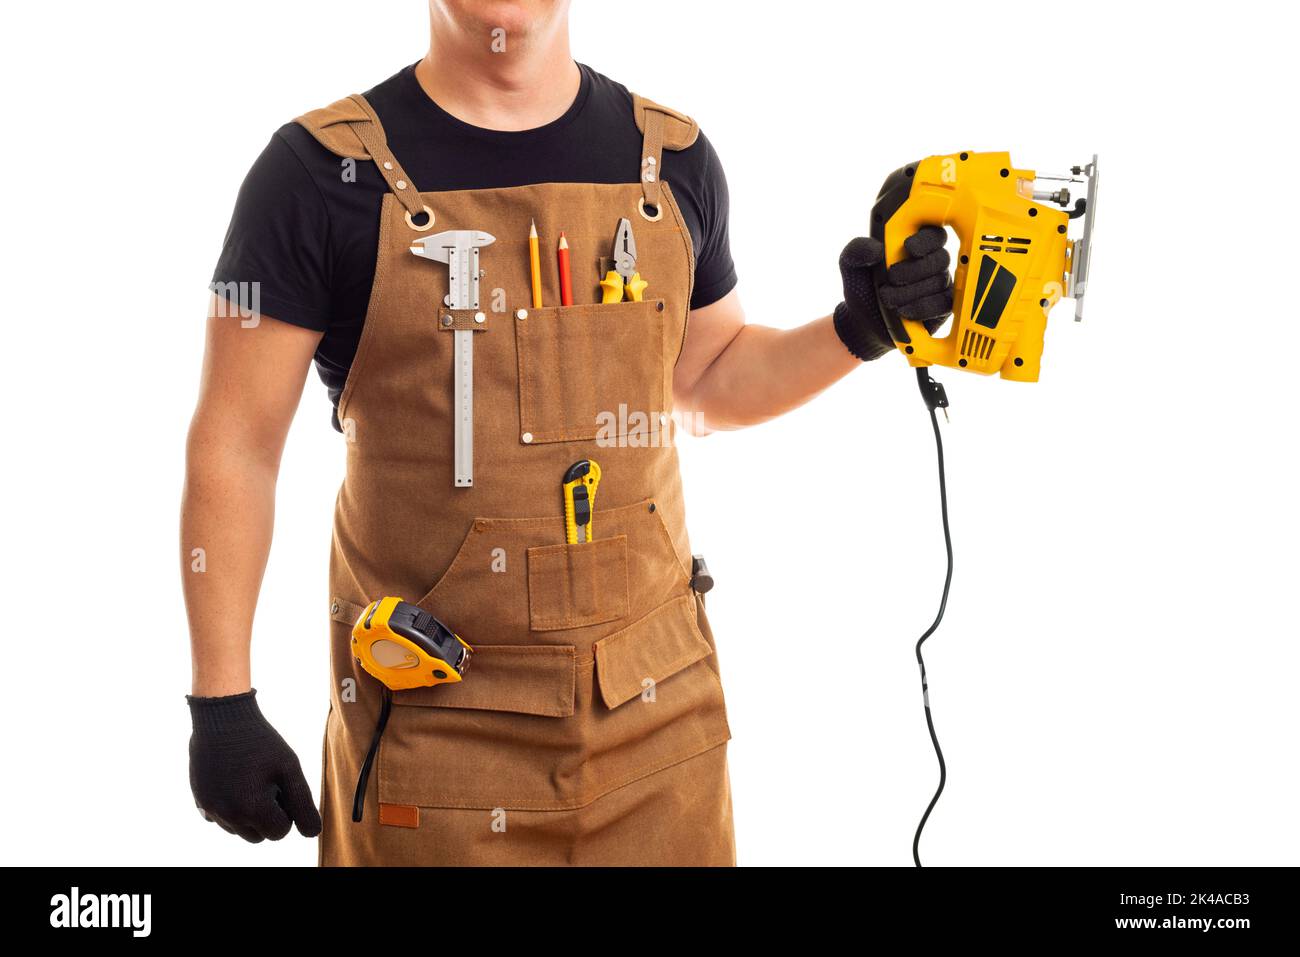 Carpenter in workers apron holding electric jig saw on white background Stock Photo